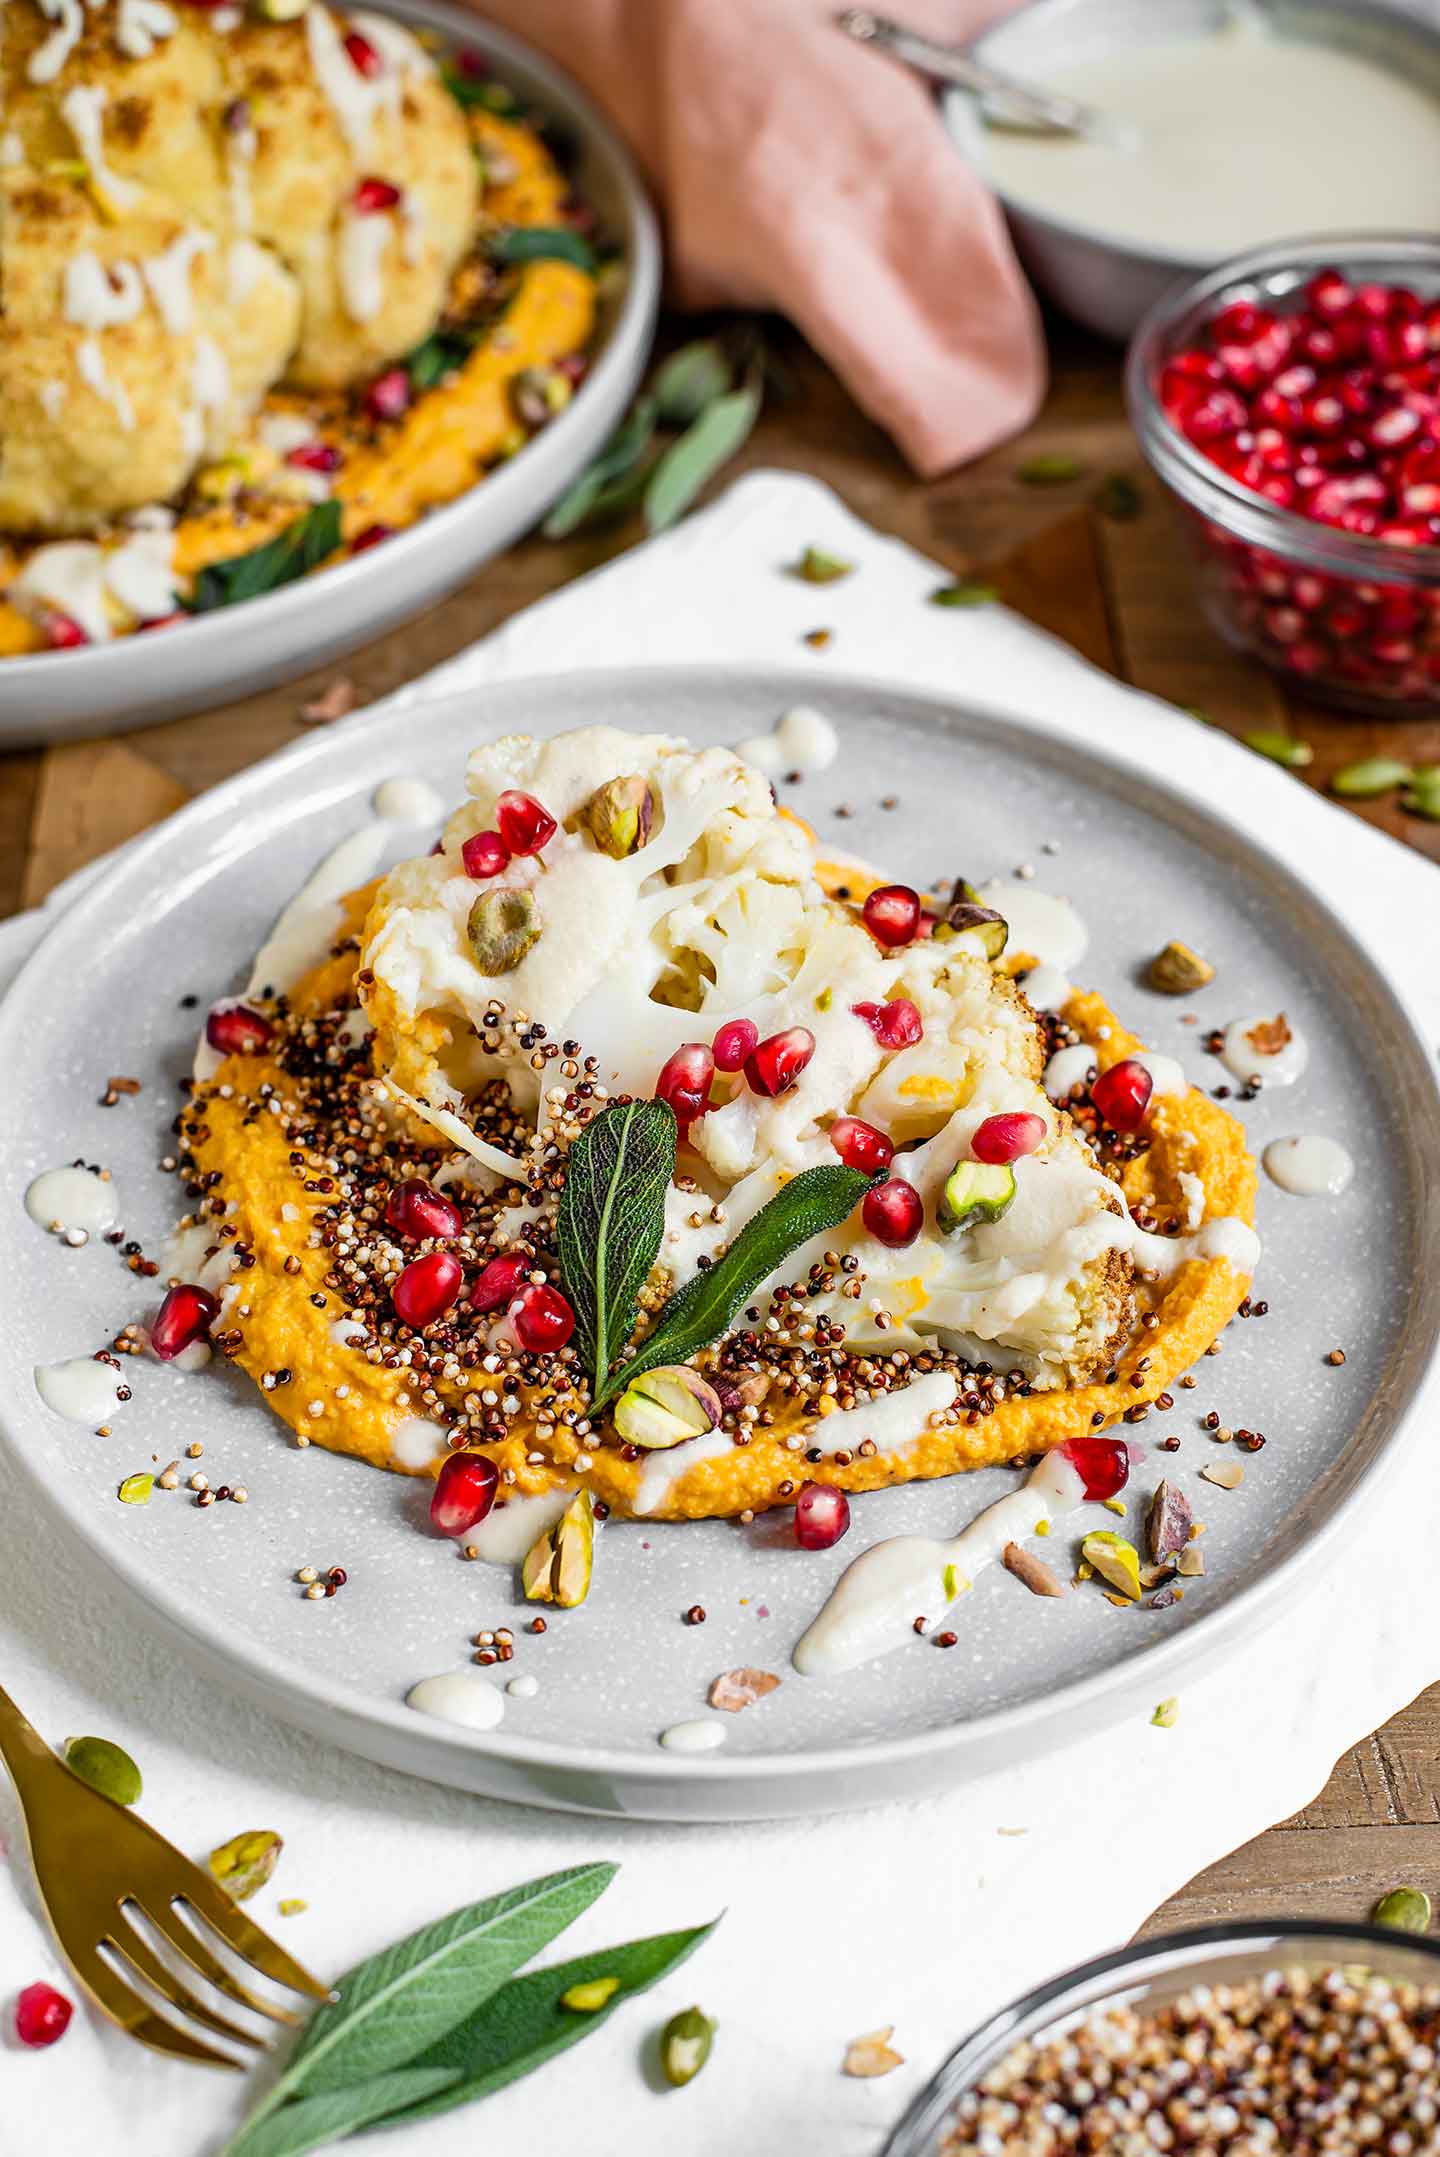 Side view of a small plate with a sliced cauliflower steak. The steak sits on a bed of hummus and is garnished with popped quinoa, pomegranate, pistachios, a creamy sauce, and crispy sage leaves.